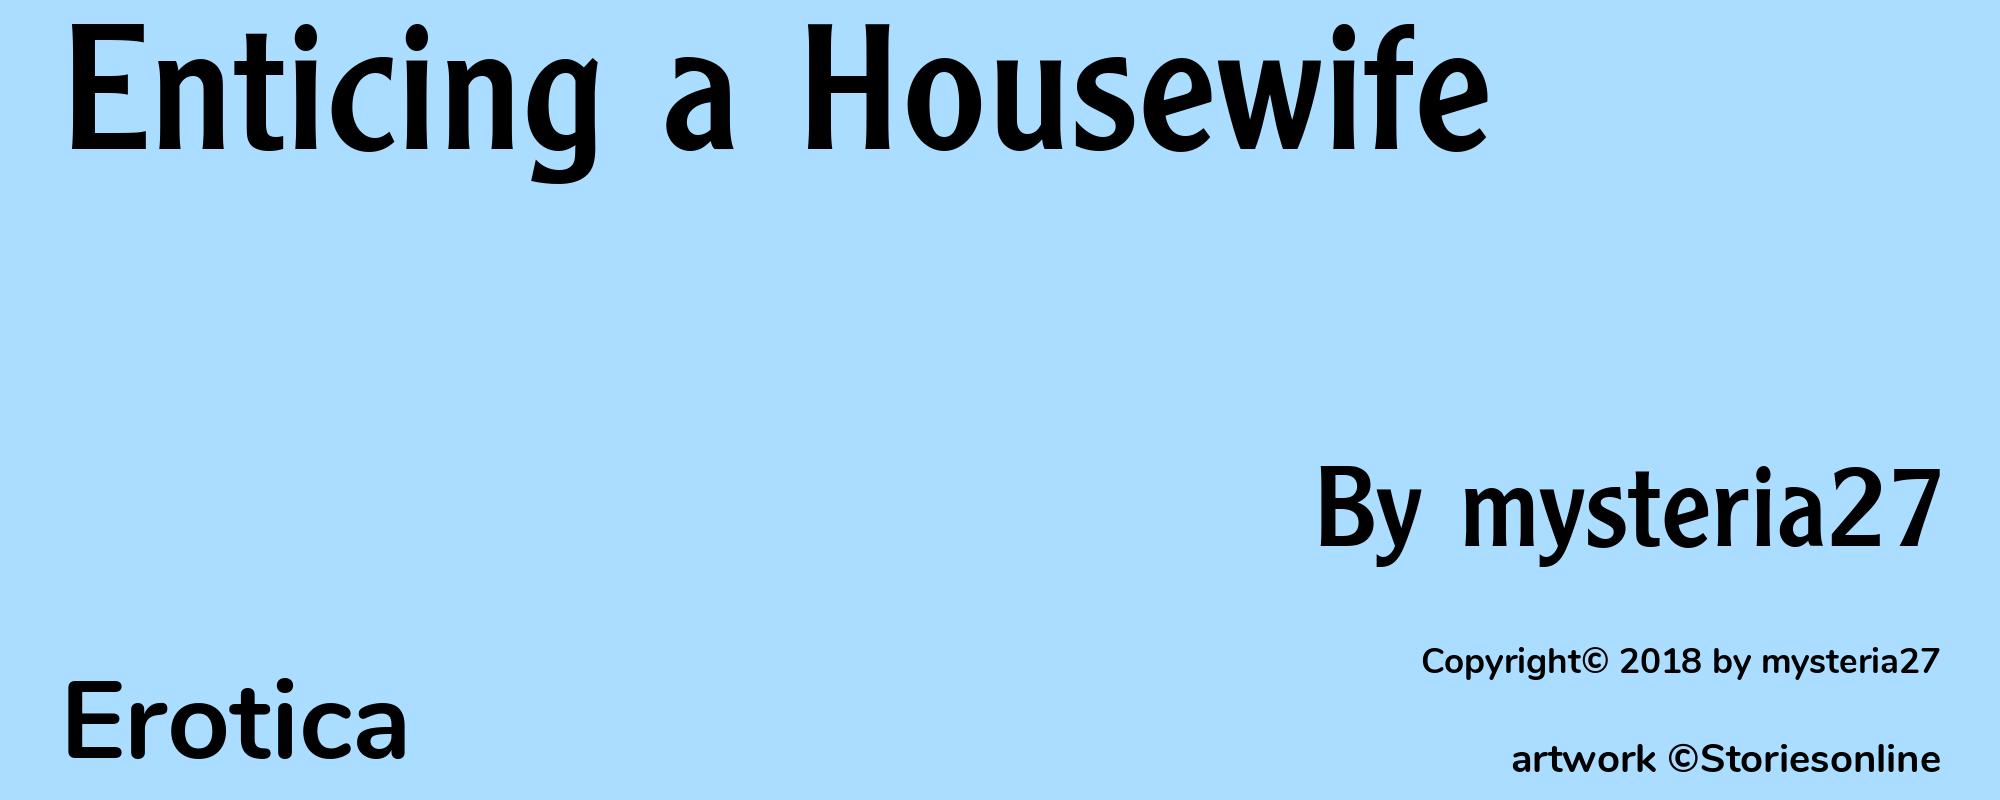 Enticing a Housewife - Cover